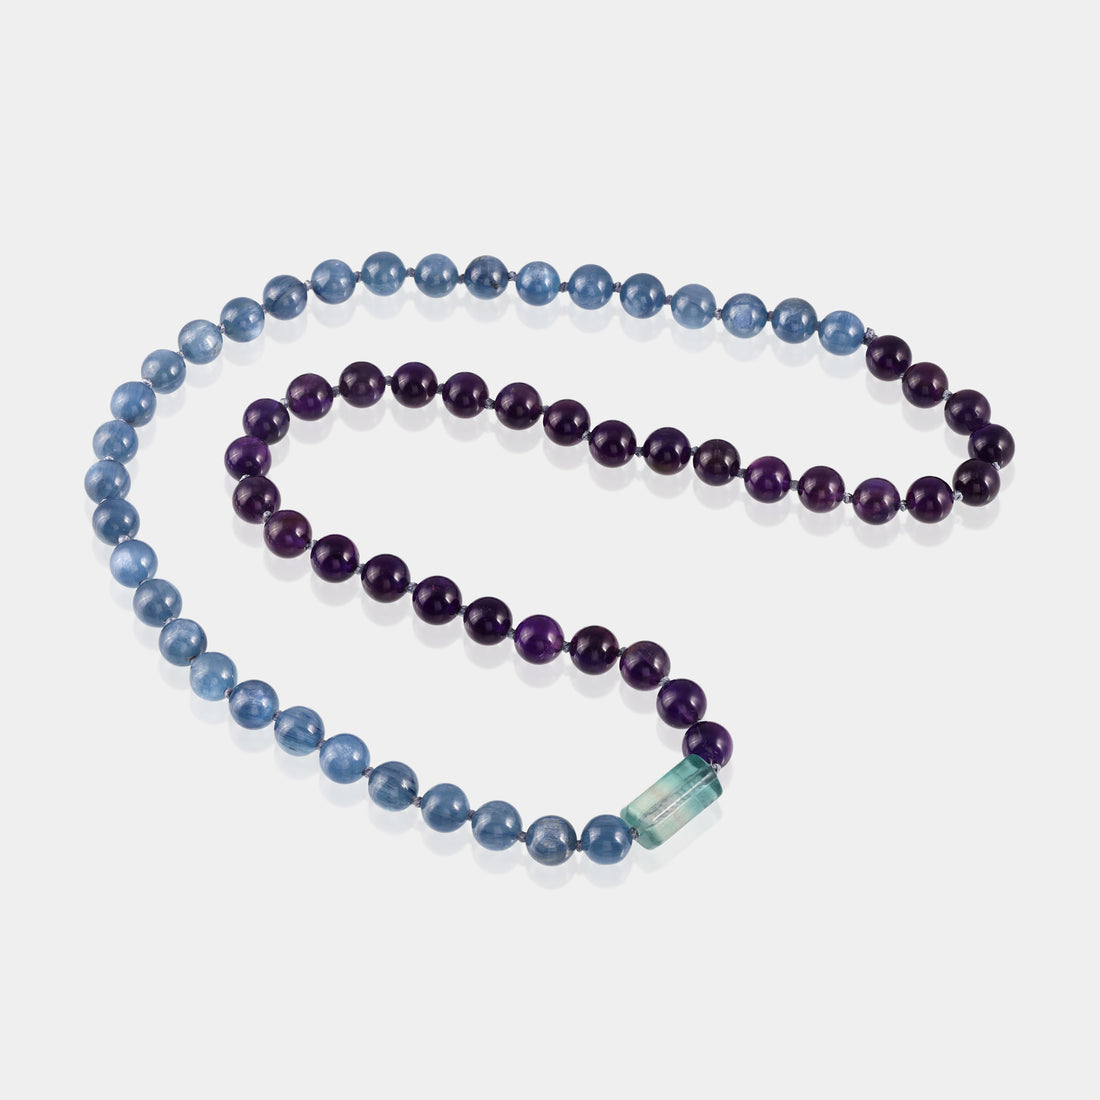 Amethyst, Kyanite and Green Fluorite Knotted Necklace